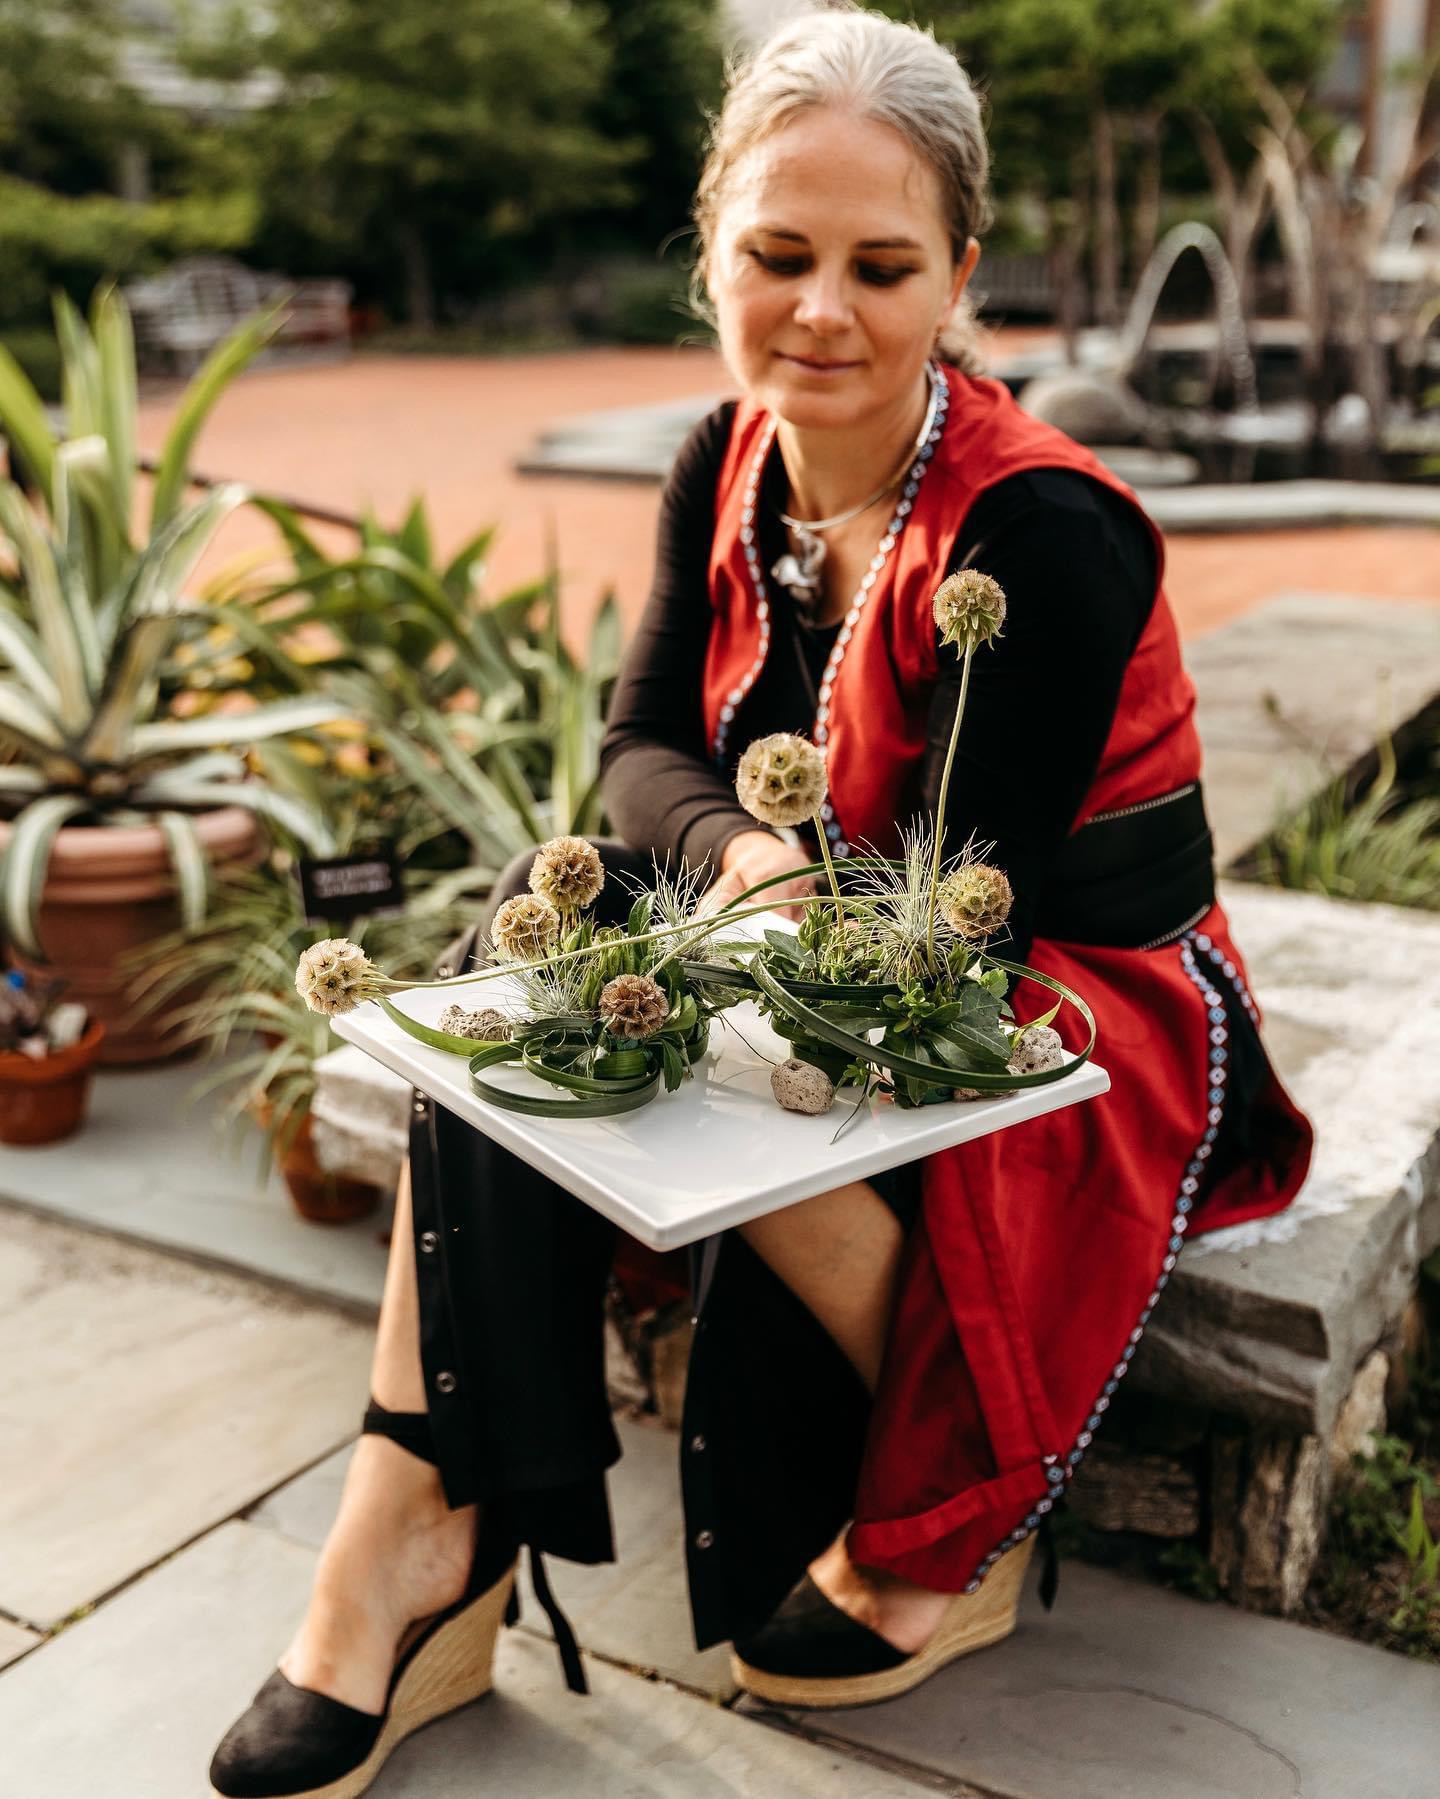 A lady outdoors, gracefully holding a tray filled with potted plants.